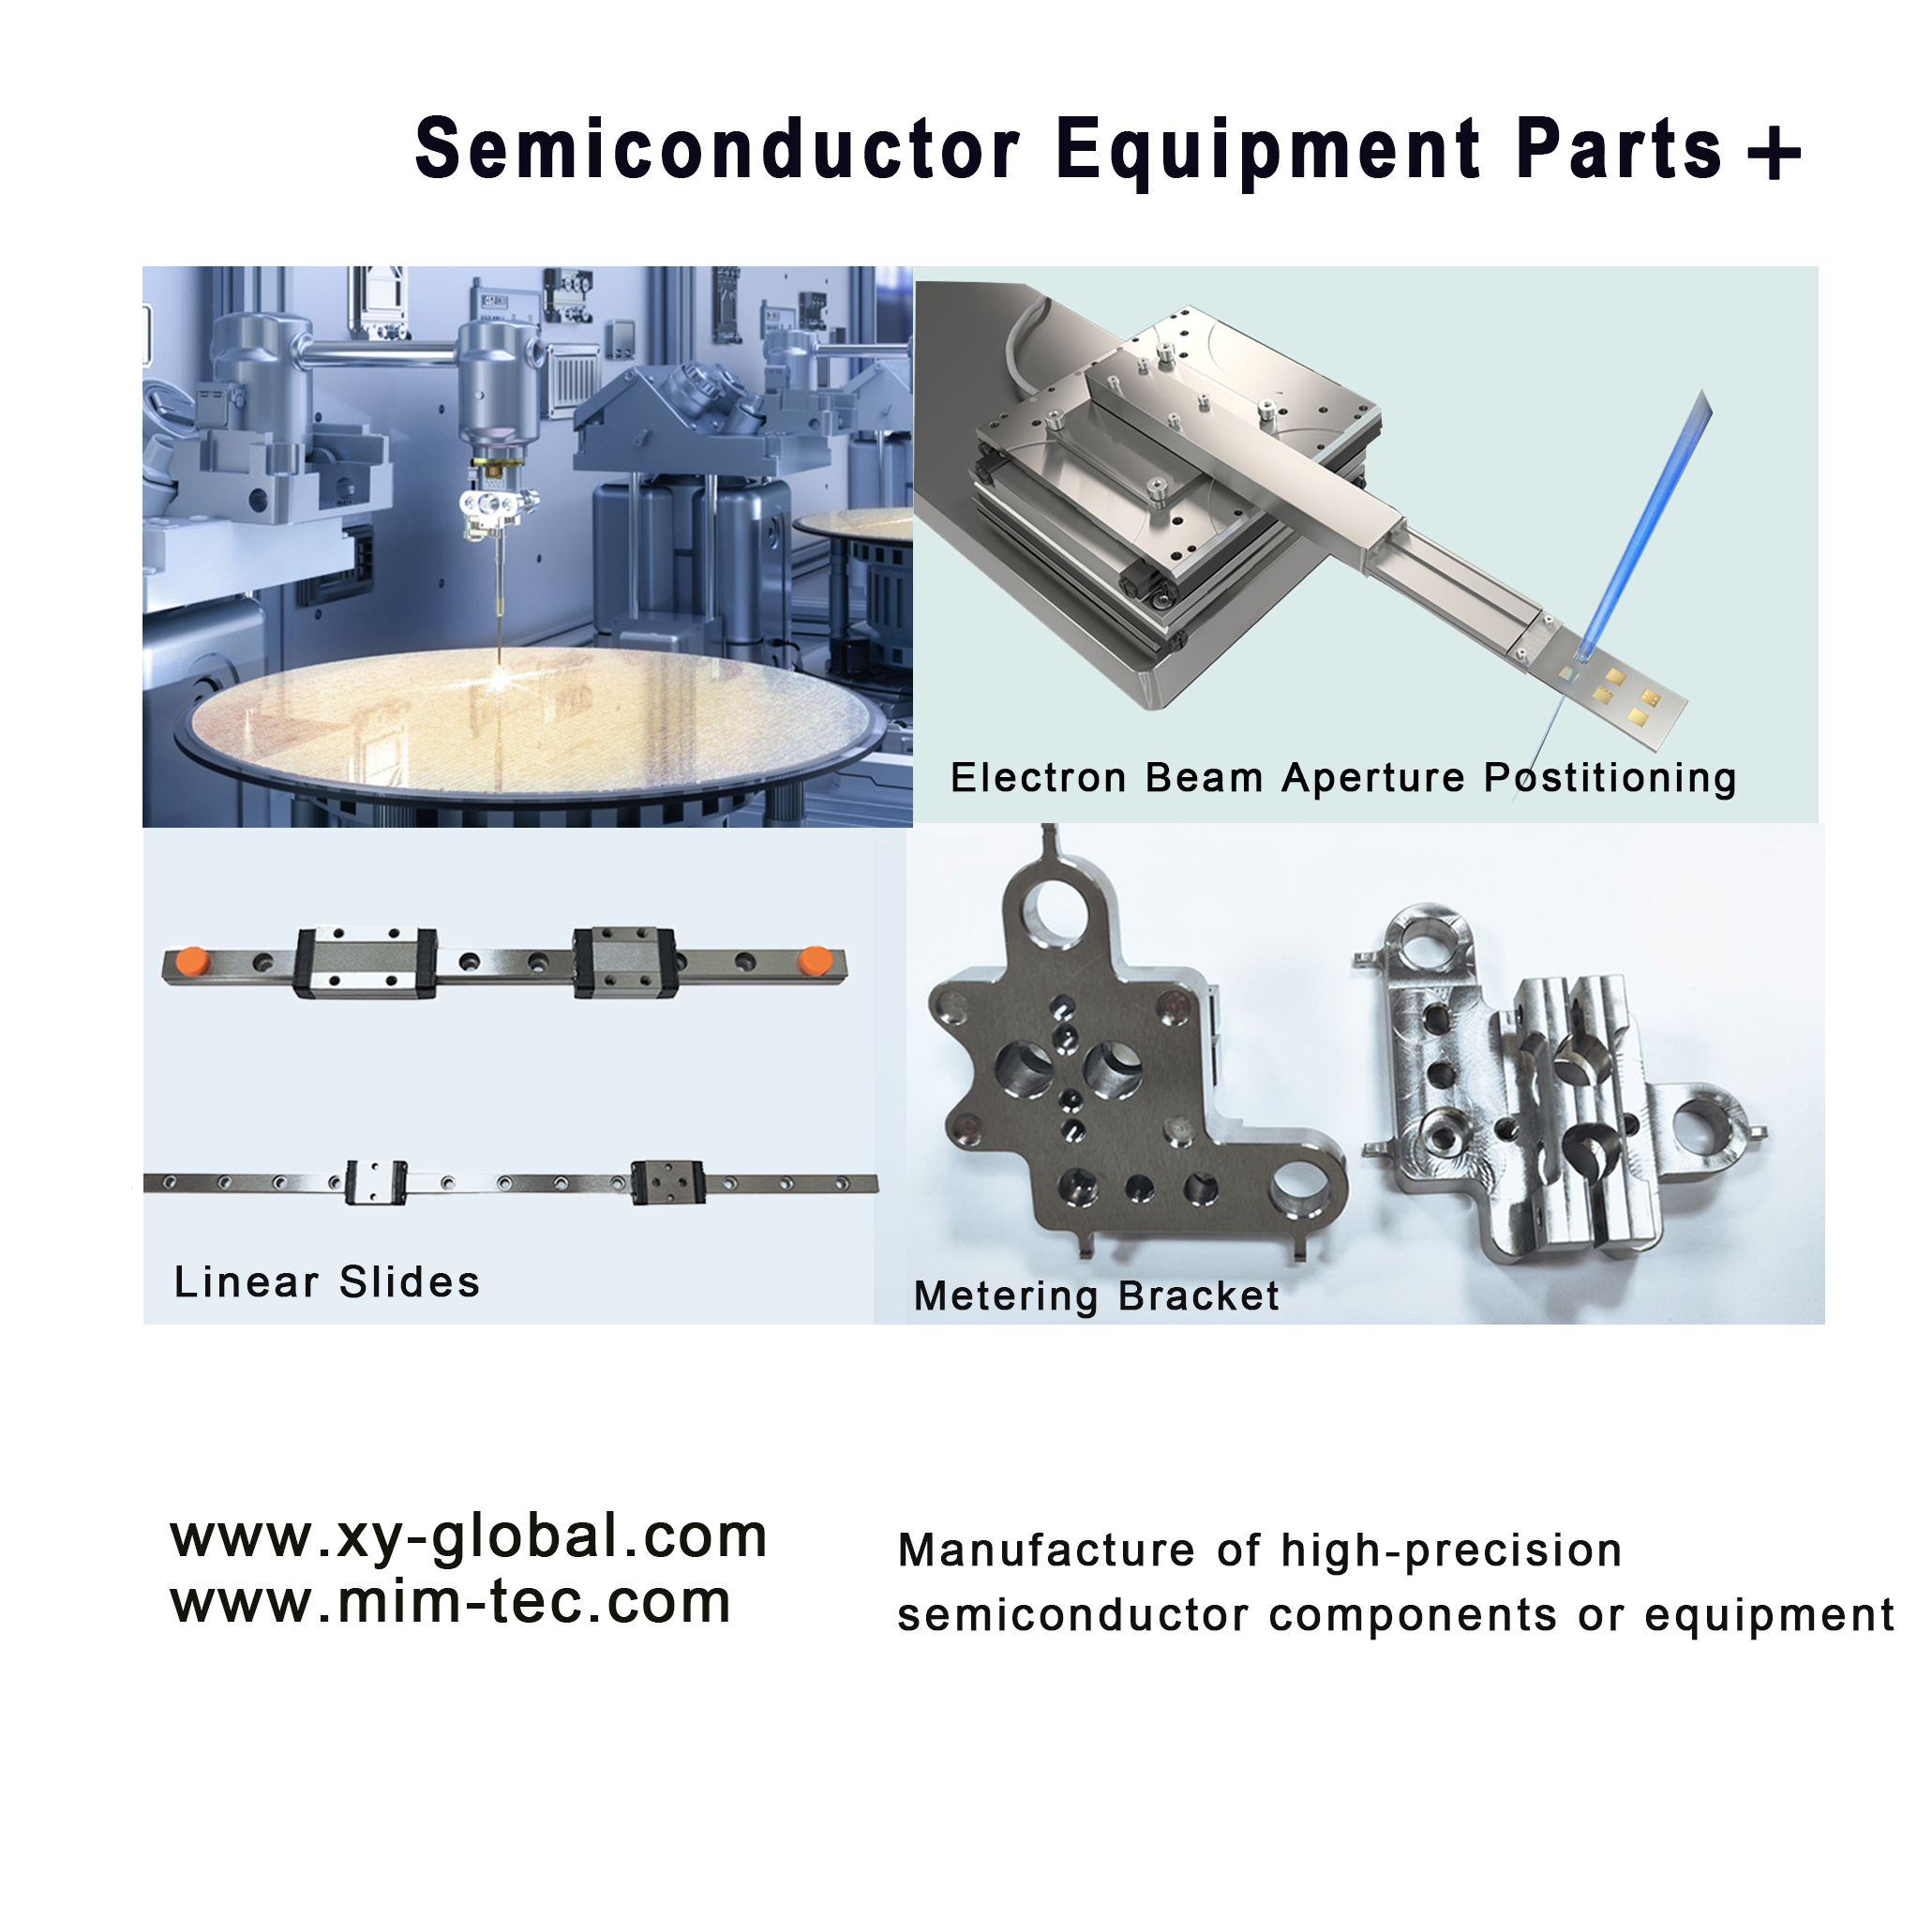 Semiconductor Equipment Parts